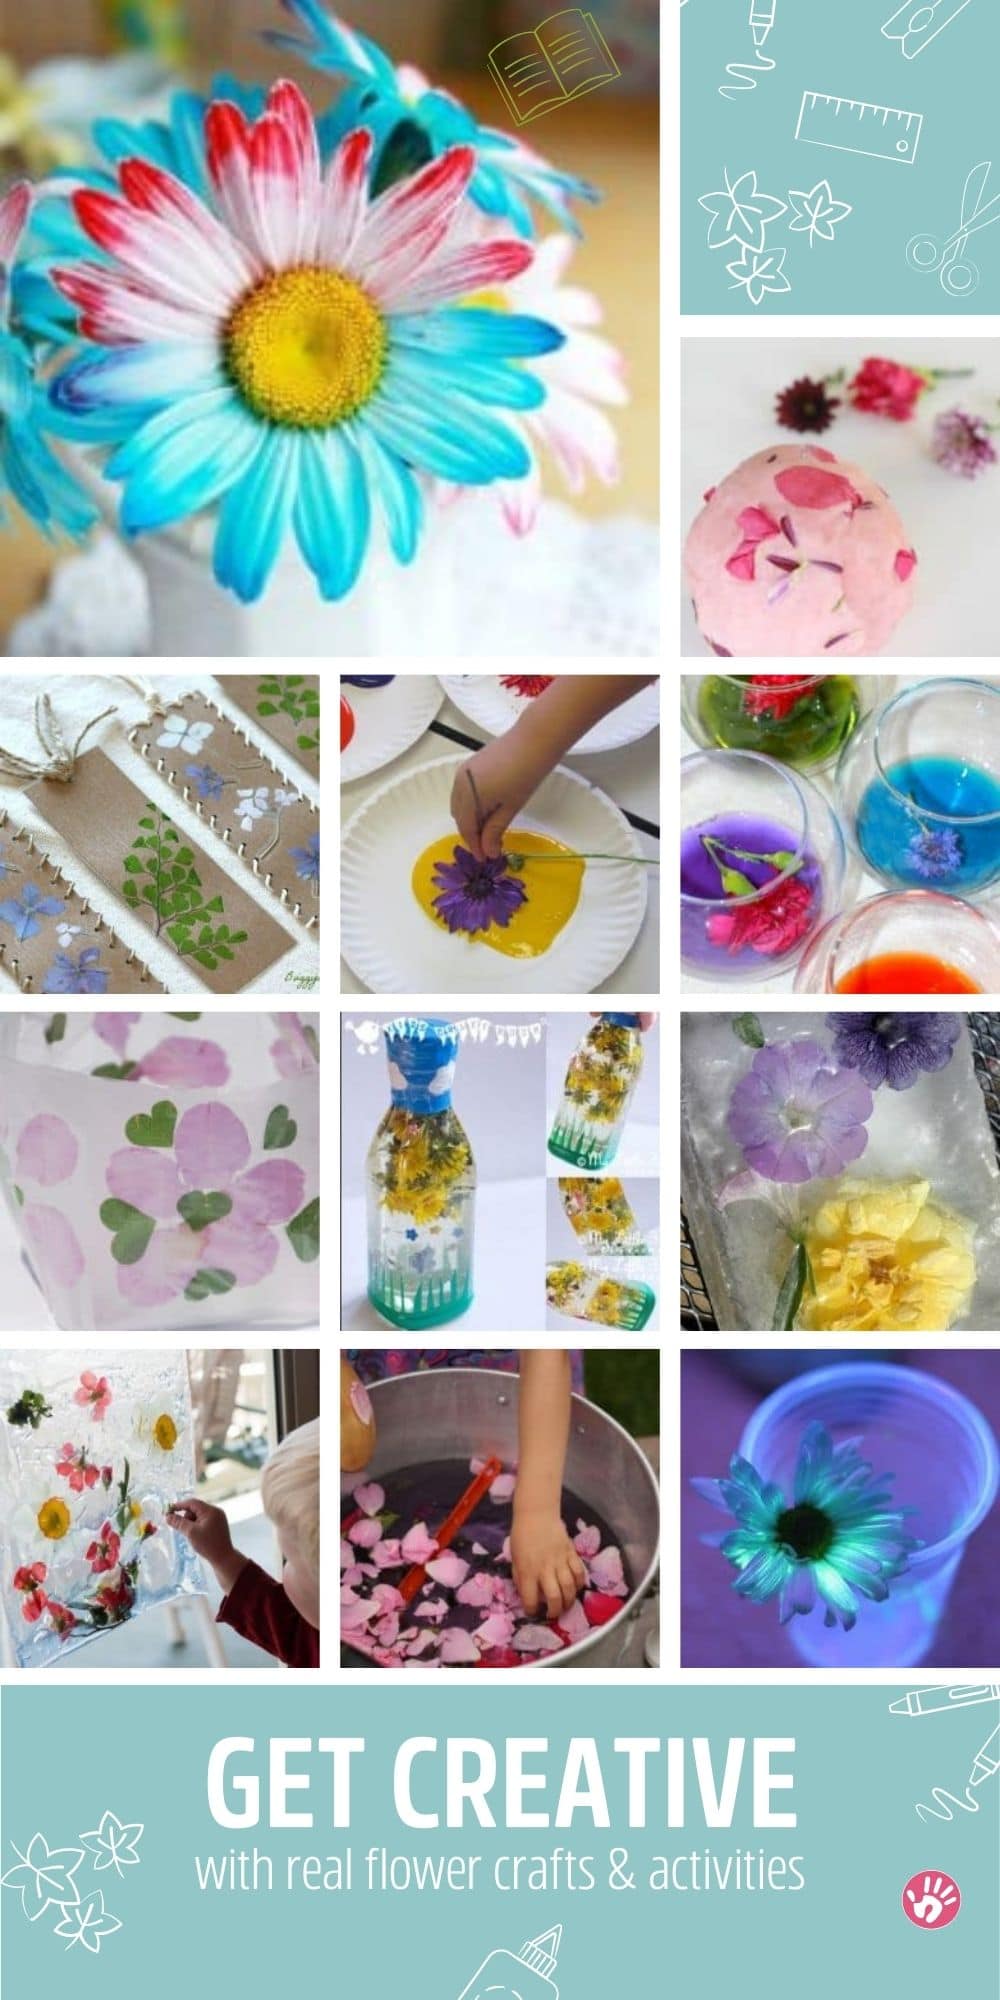 Make real flower crafts and activities with these 22 fun and easy ideas. Enjoy creating and playing together to welcome the new season!